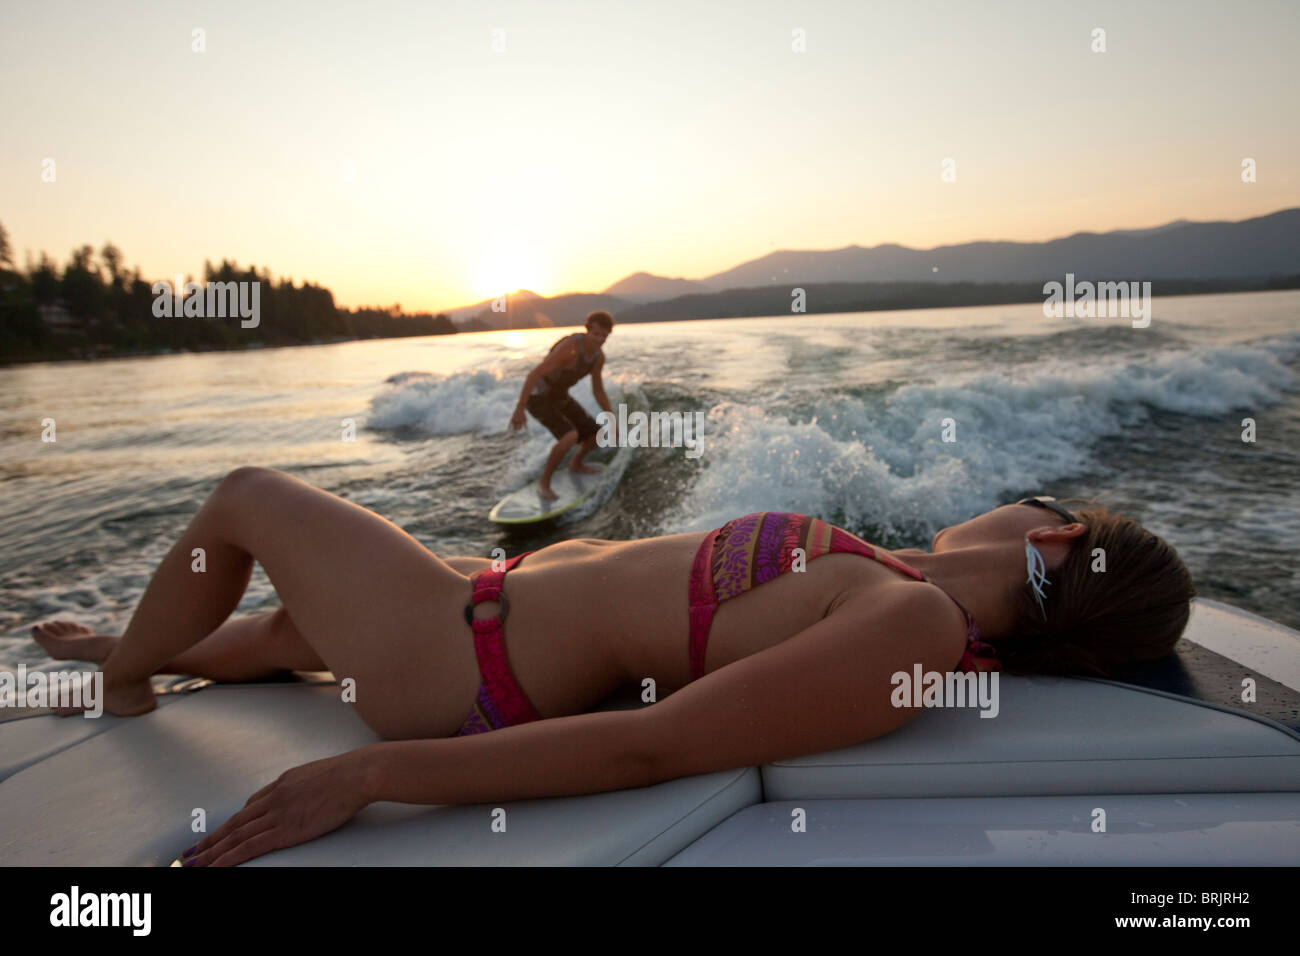 Young man wakesurfing in Idaho as a girl in a bikini watches from the boat. Stock Photo